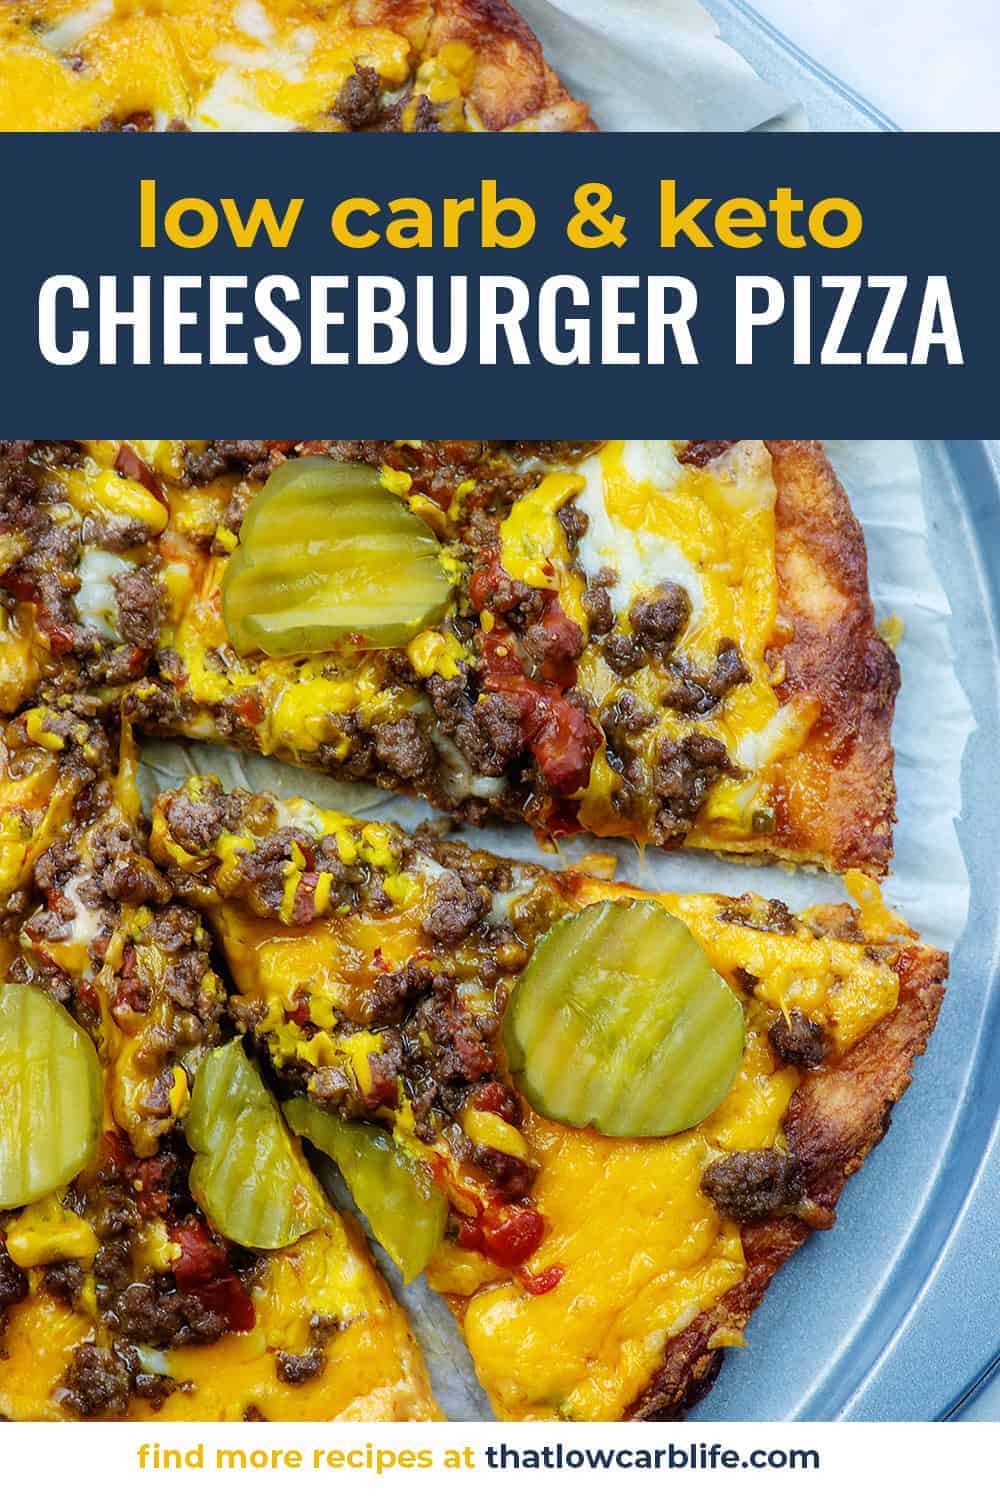 low carb cheeseburger pizza slices on pizza pan